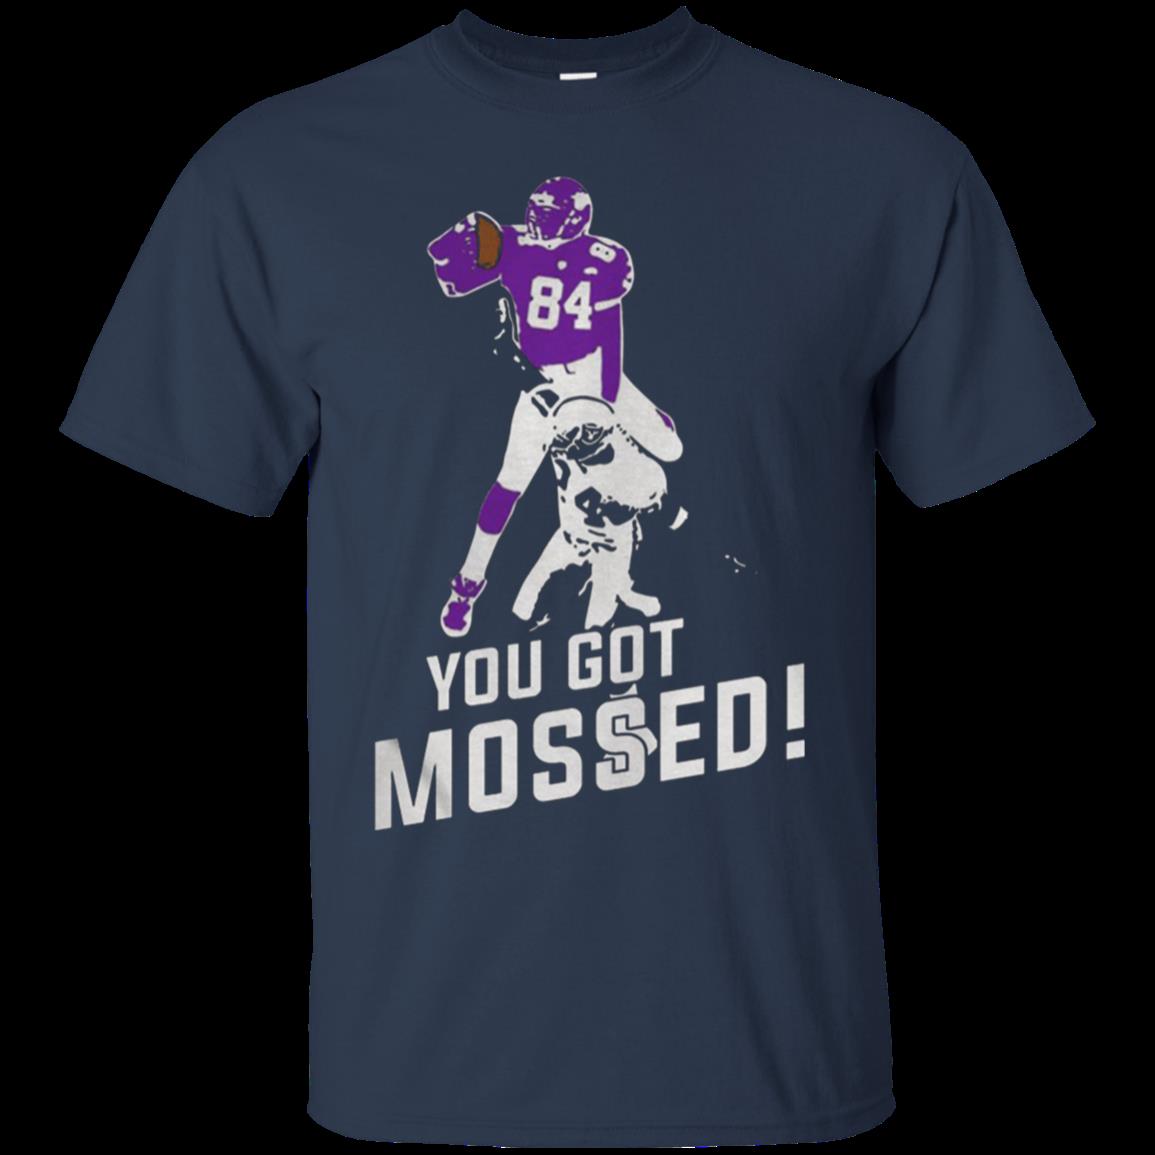 Randy Moss Over Charles Woodson You Got Mossed T-Shirt – Moano Store 1